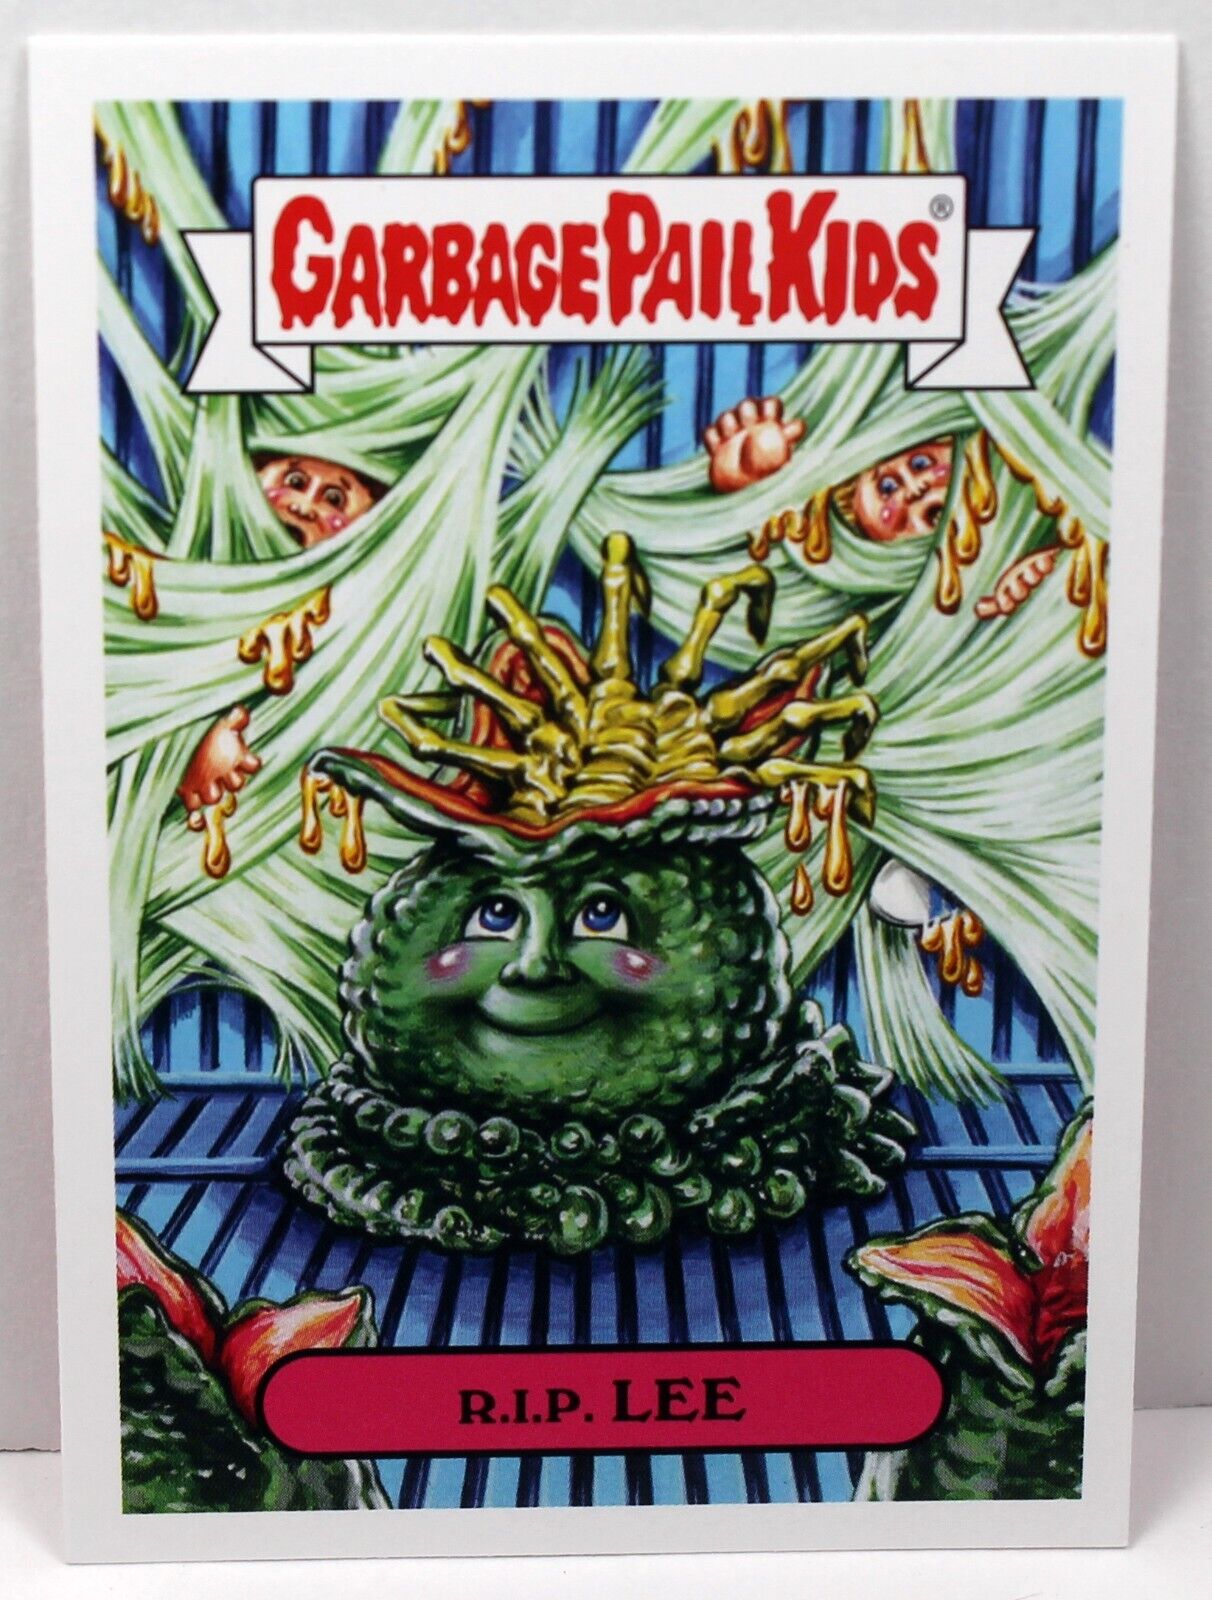 2019 Garbage Pail Kids Revenge Of Oh The Horror-Ible Card Pick List UPDATED 5-24